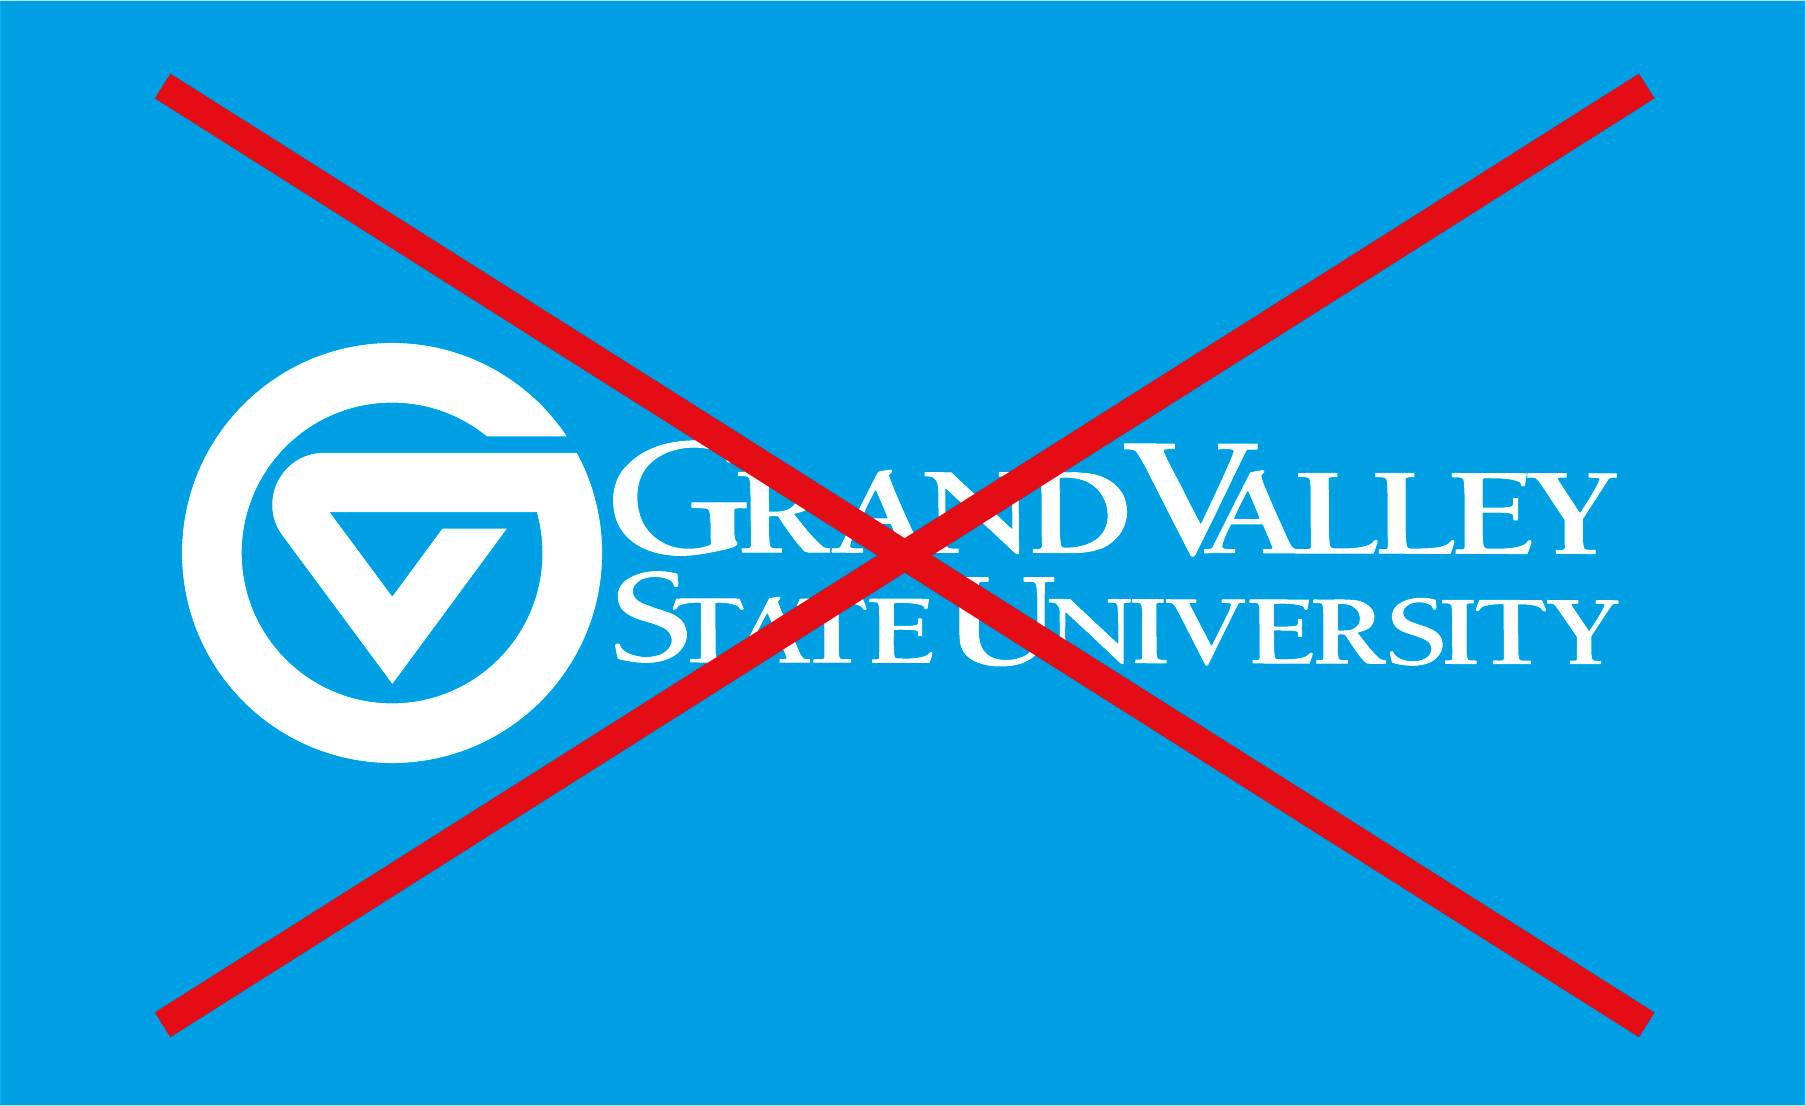 A Grand Valley logo missing its registered trademark symbol. This is overlaid with a red X.